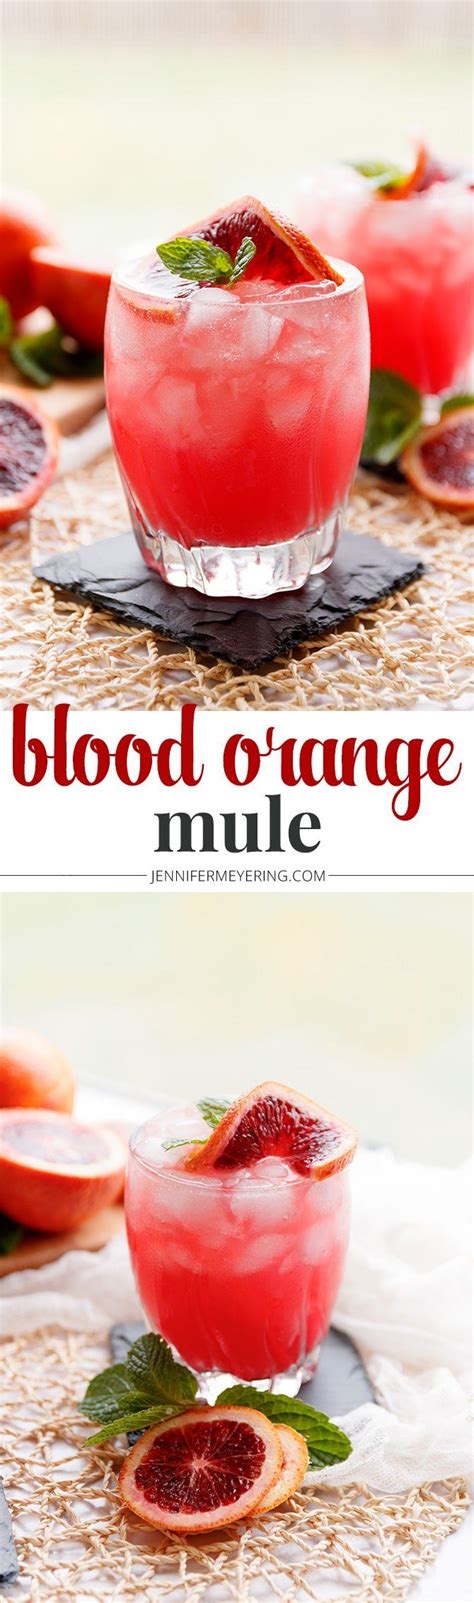 Blood Orange Mule Easy Drink Recipes Delicious Drink Recipes Food And